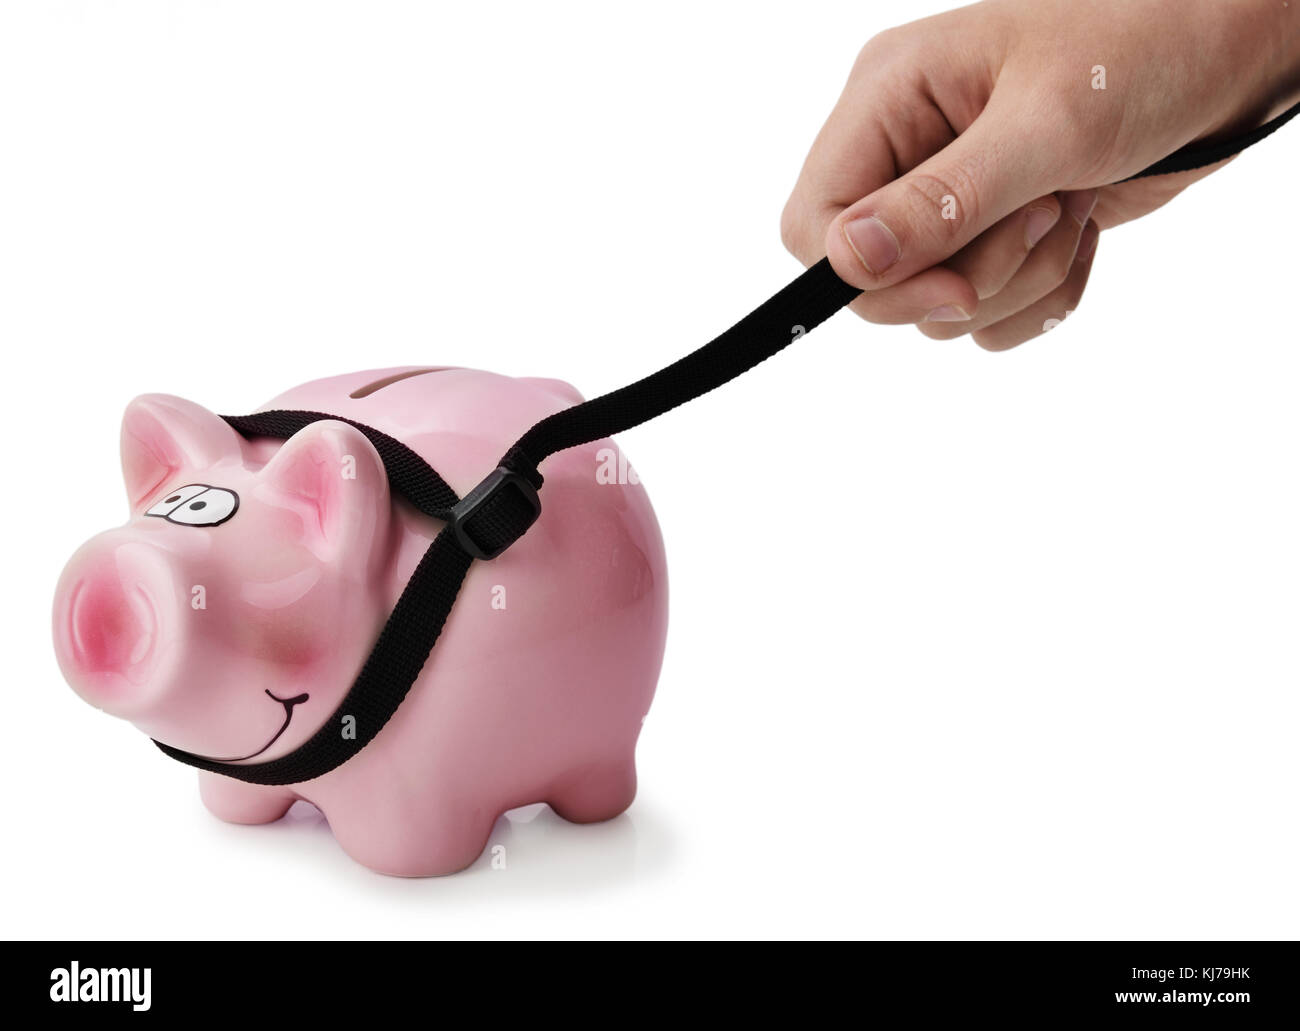 Concept of keeping budget under control, a piggy bank on a leash Stock Photo